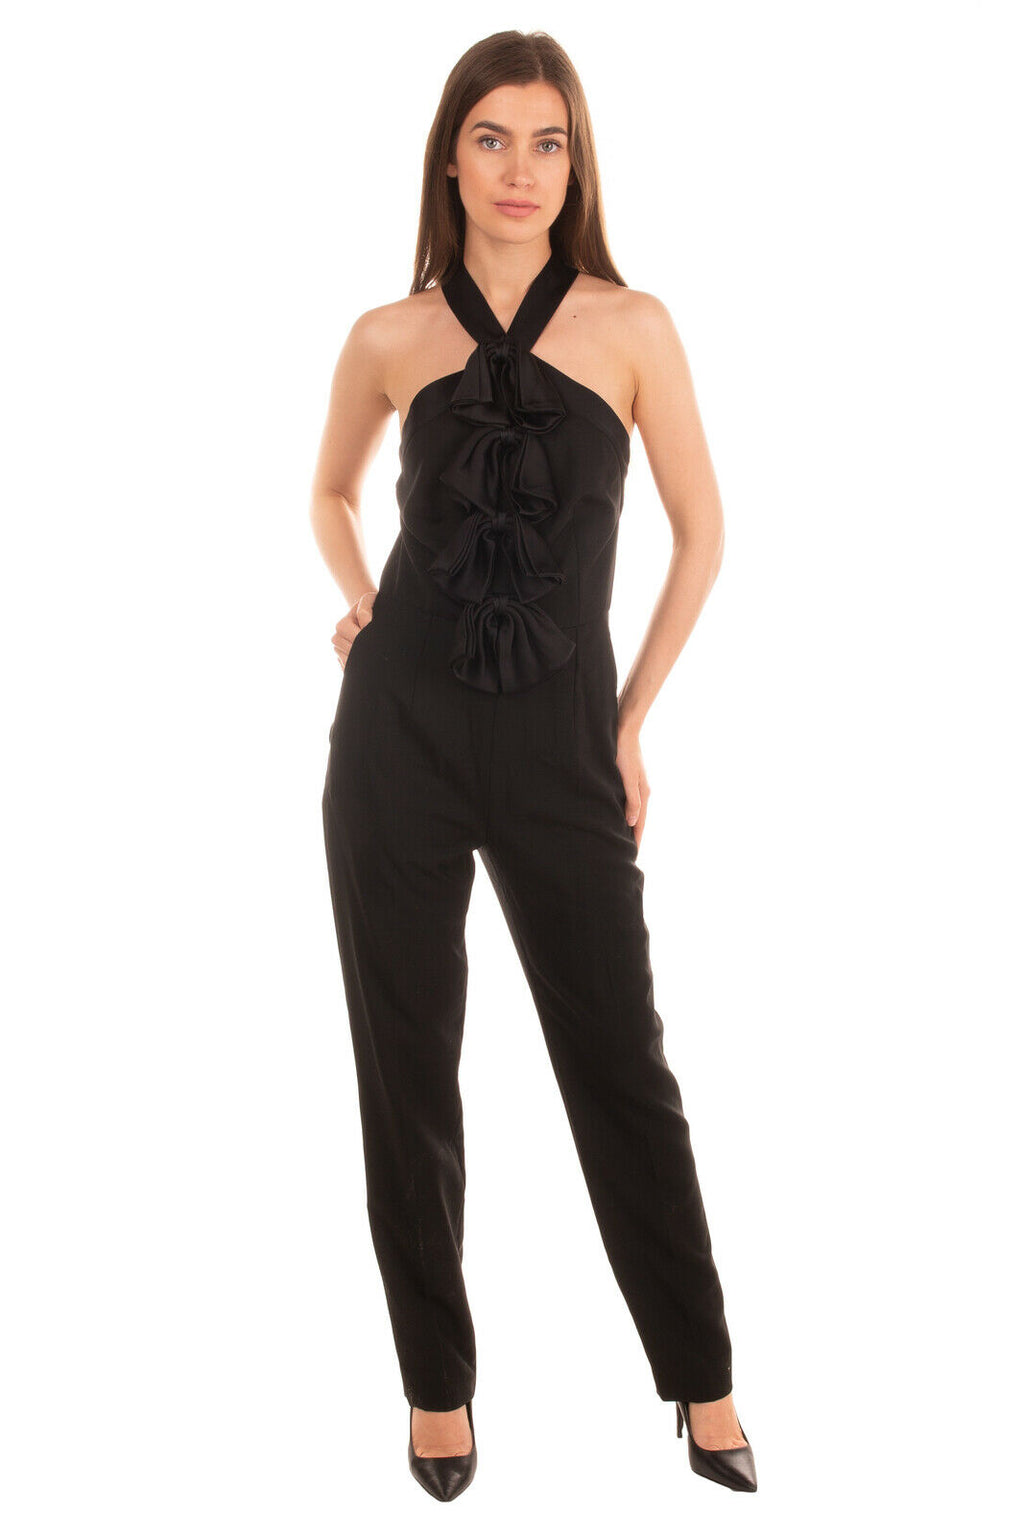 GIVENCHY Mohair & Wool Jumpsuit Size M